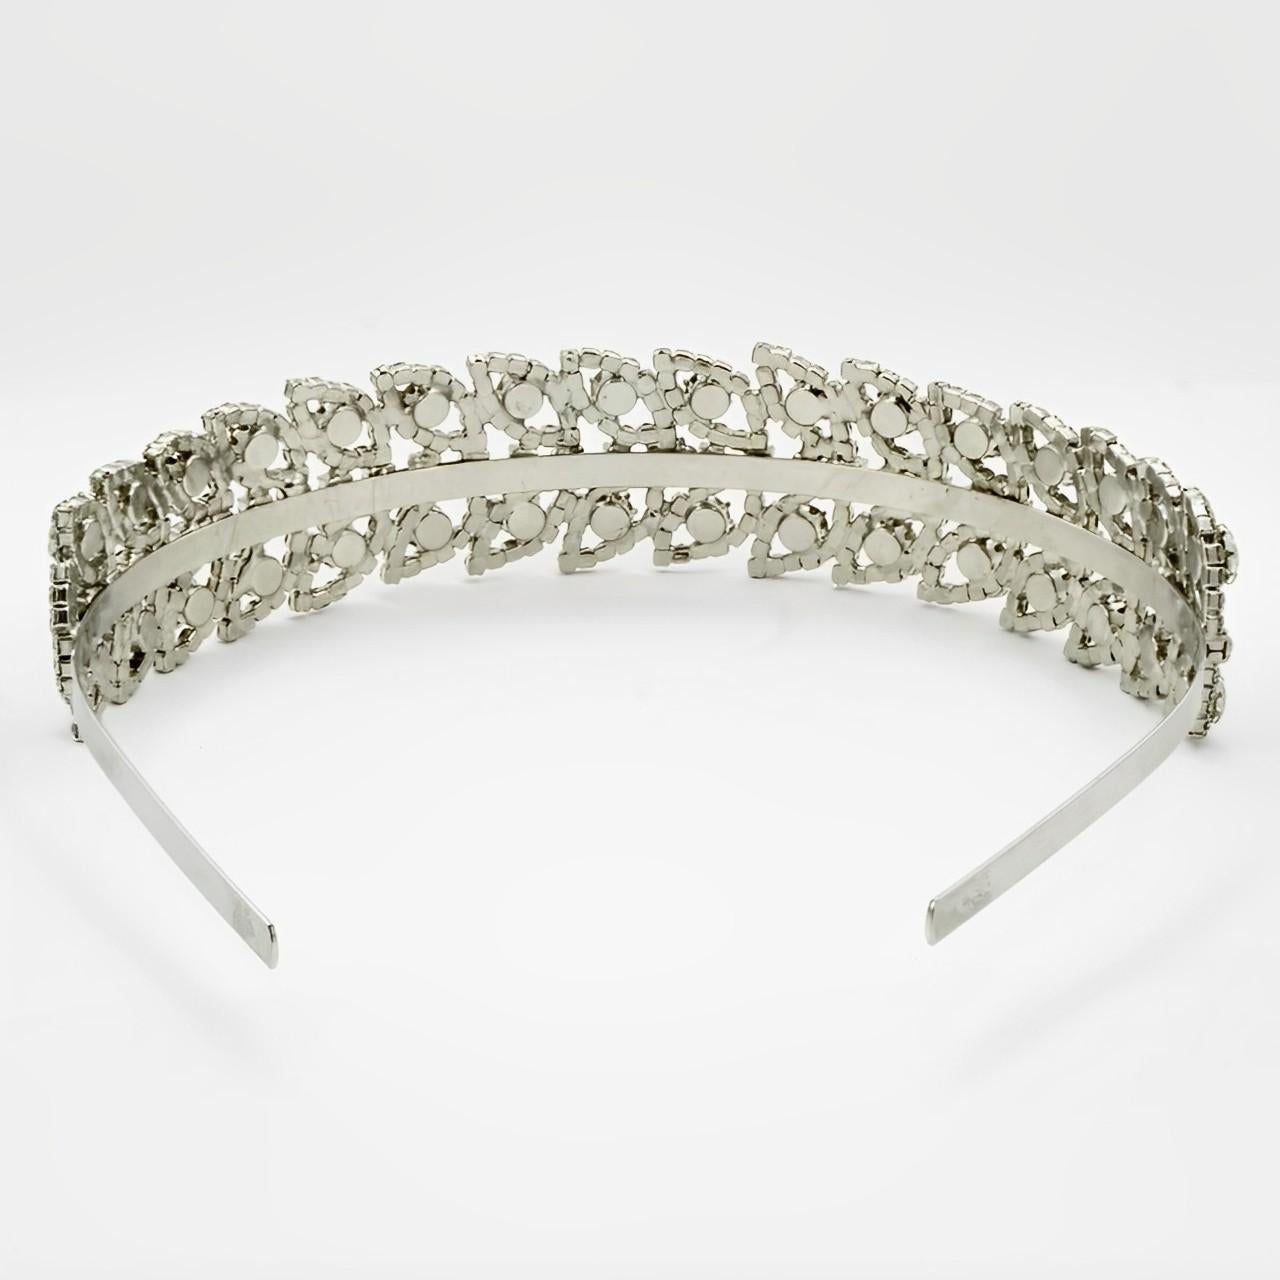 Silver Plated Tiara / Headband with Faceted Rhinestones circa 1980s In Good Condition For Sale In London, GB